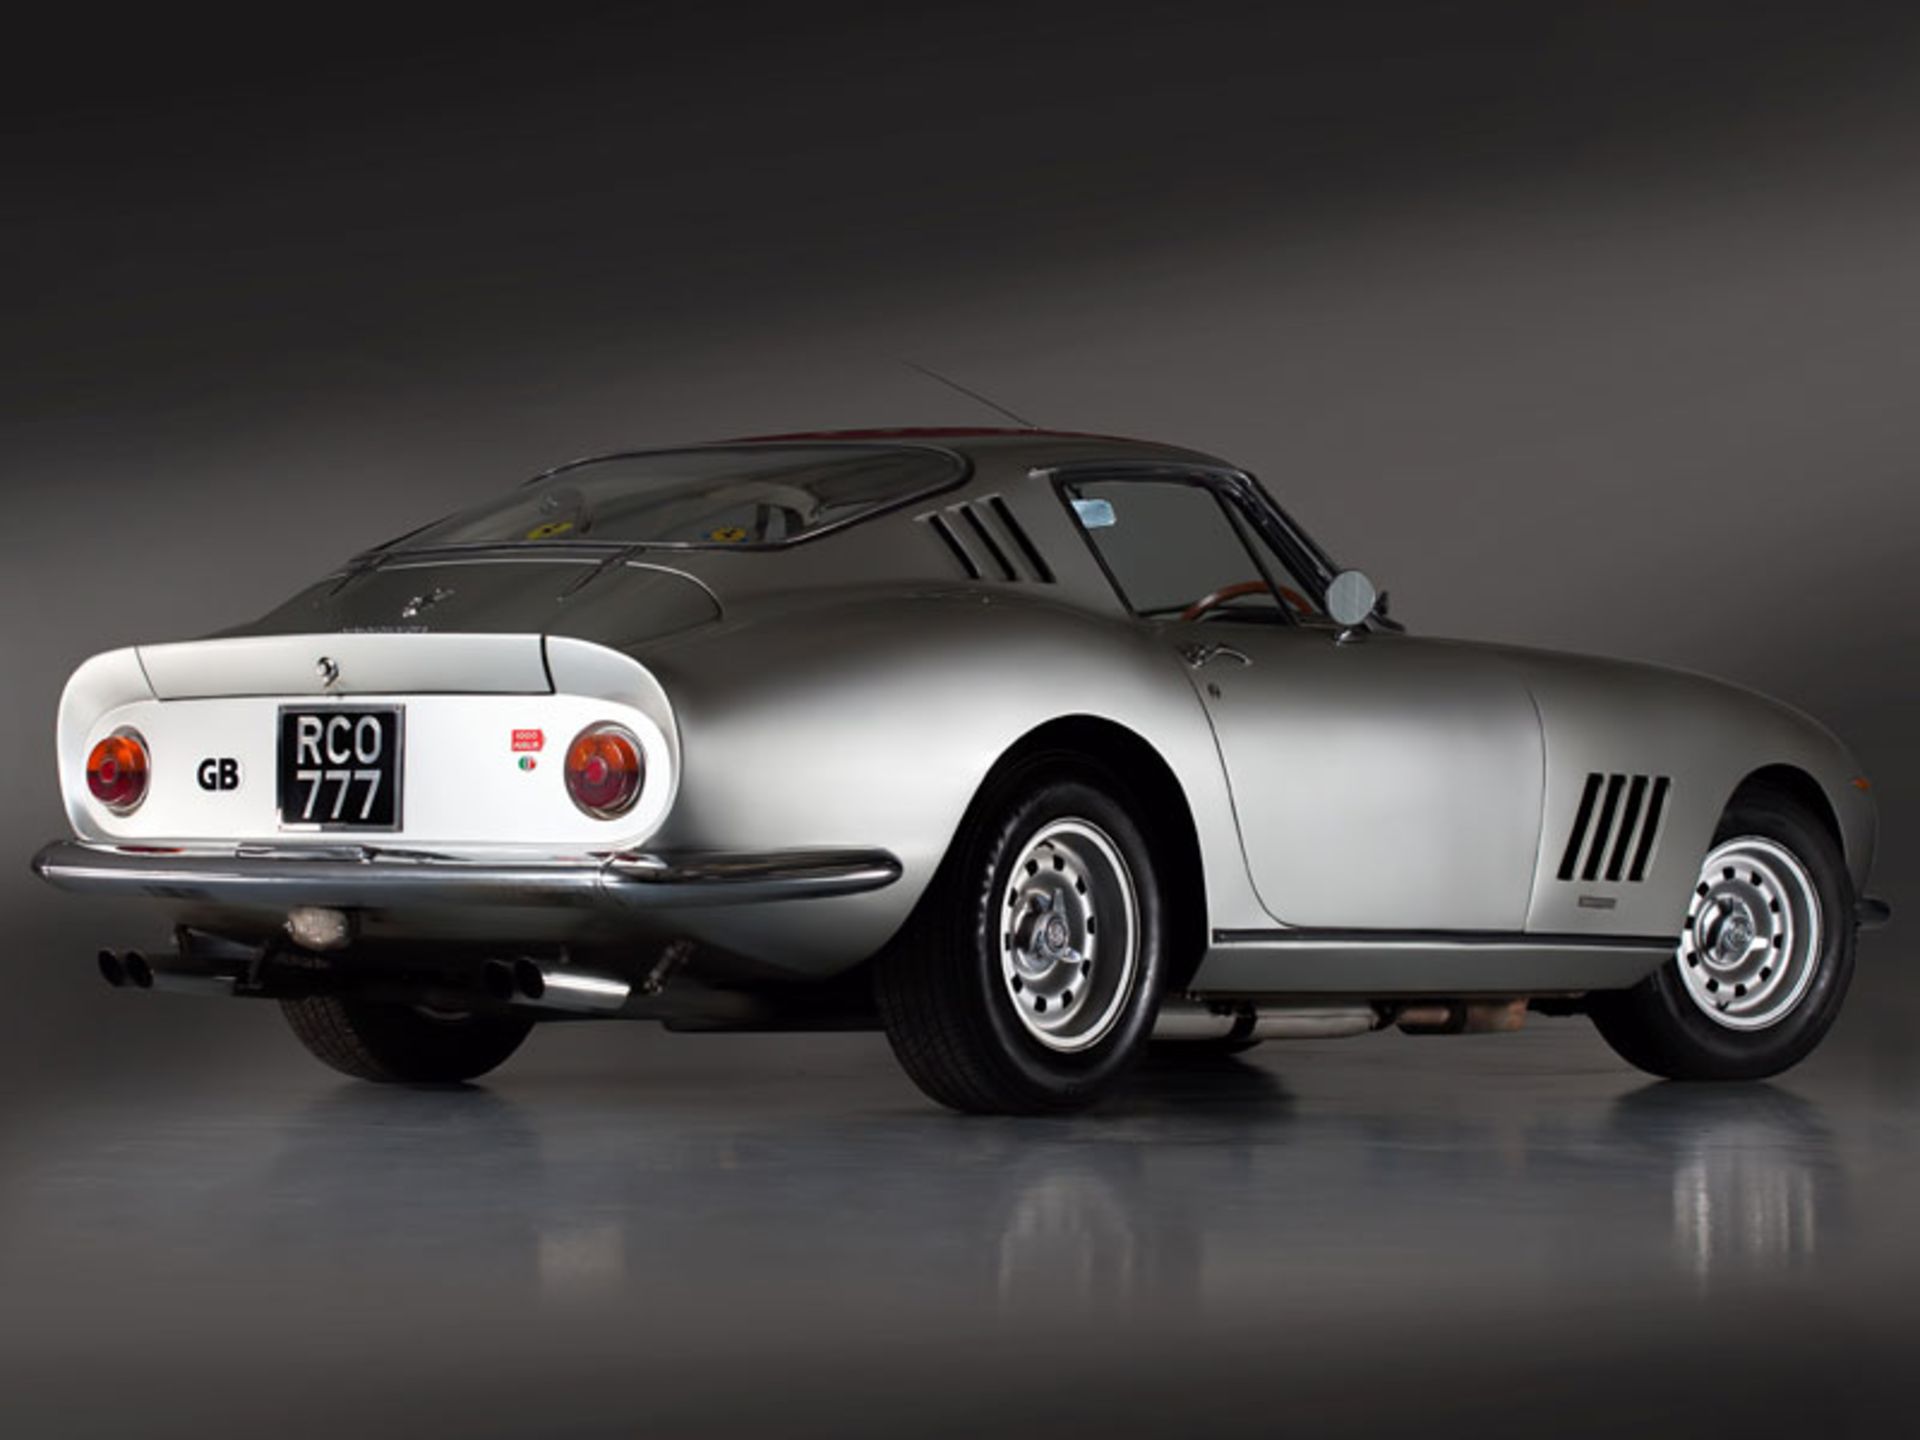 Registering to Bid on the Ferrari 275 GTB/4 from the Richard Colton Collection:
- All Registrations - Image 5 of 10